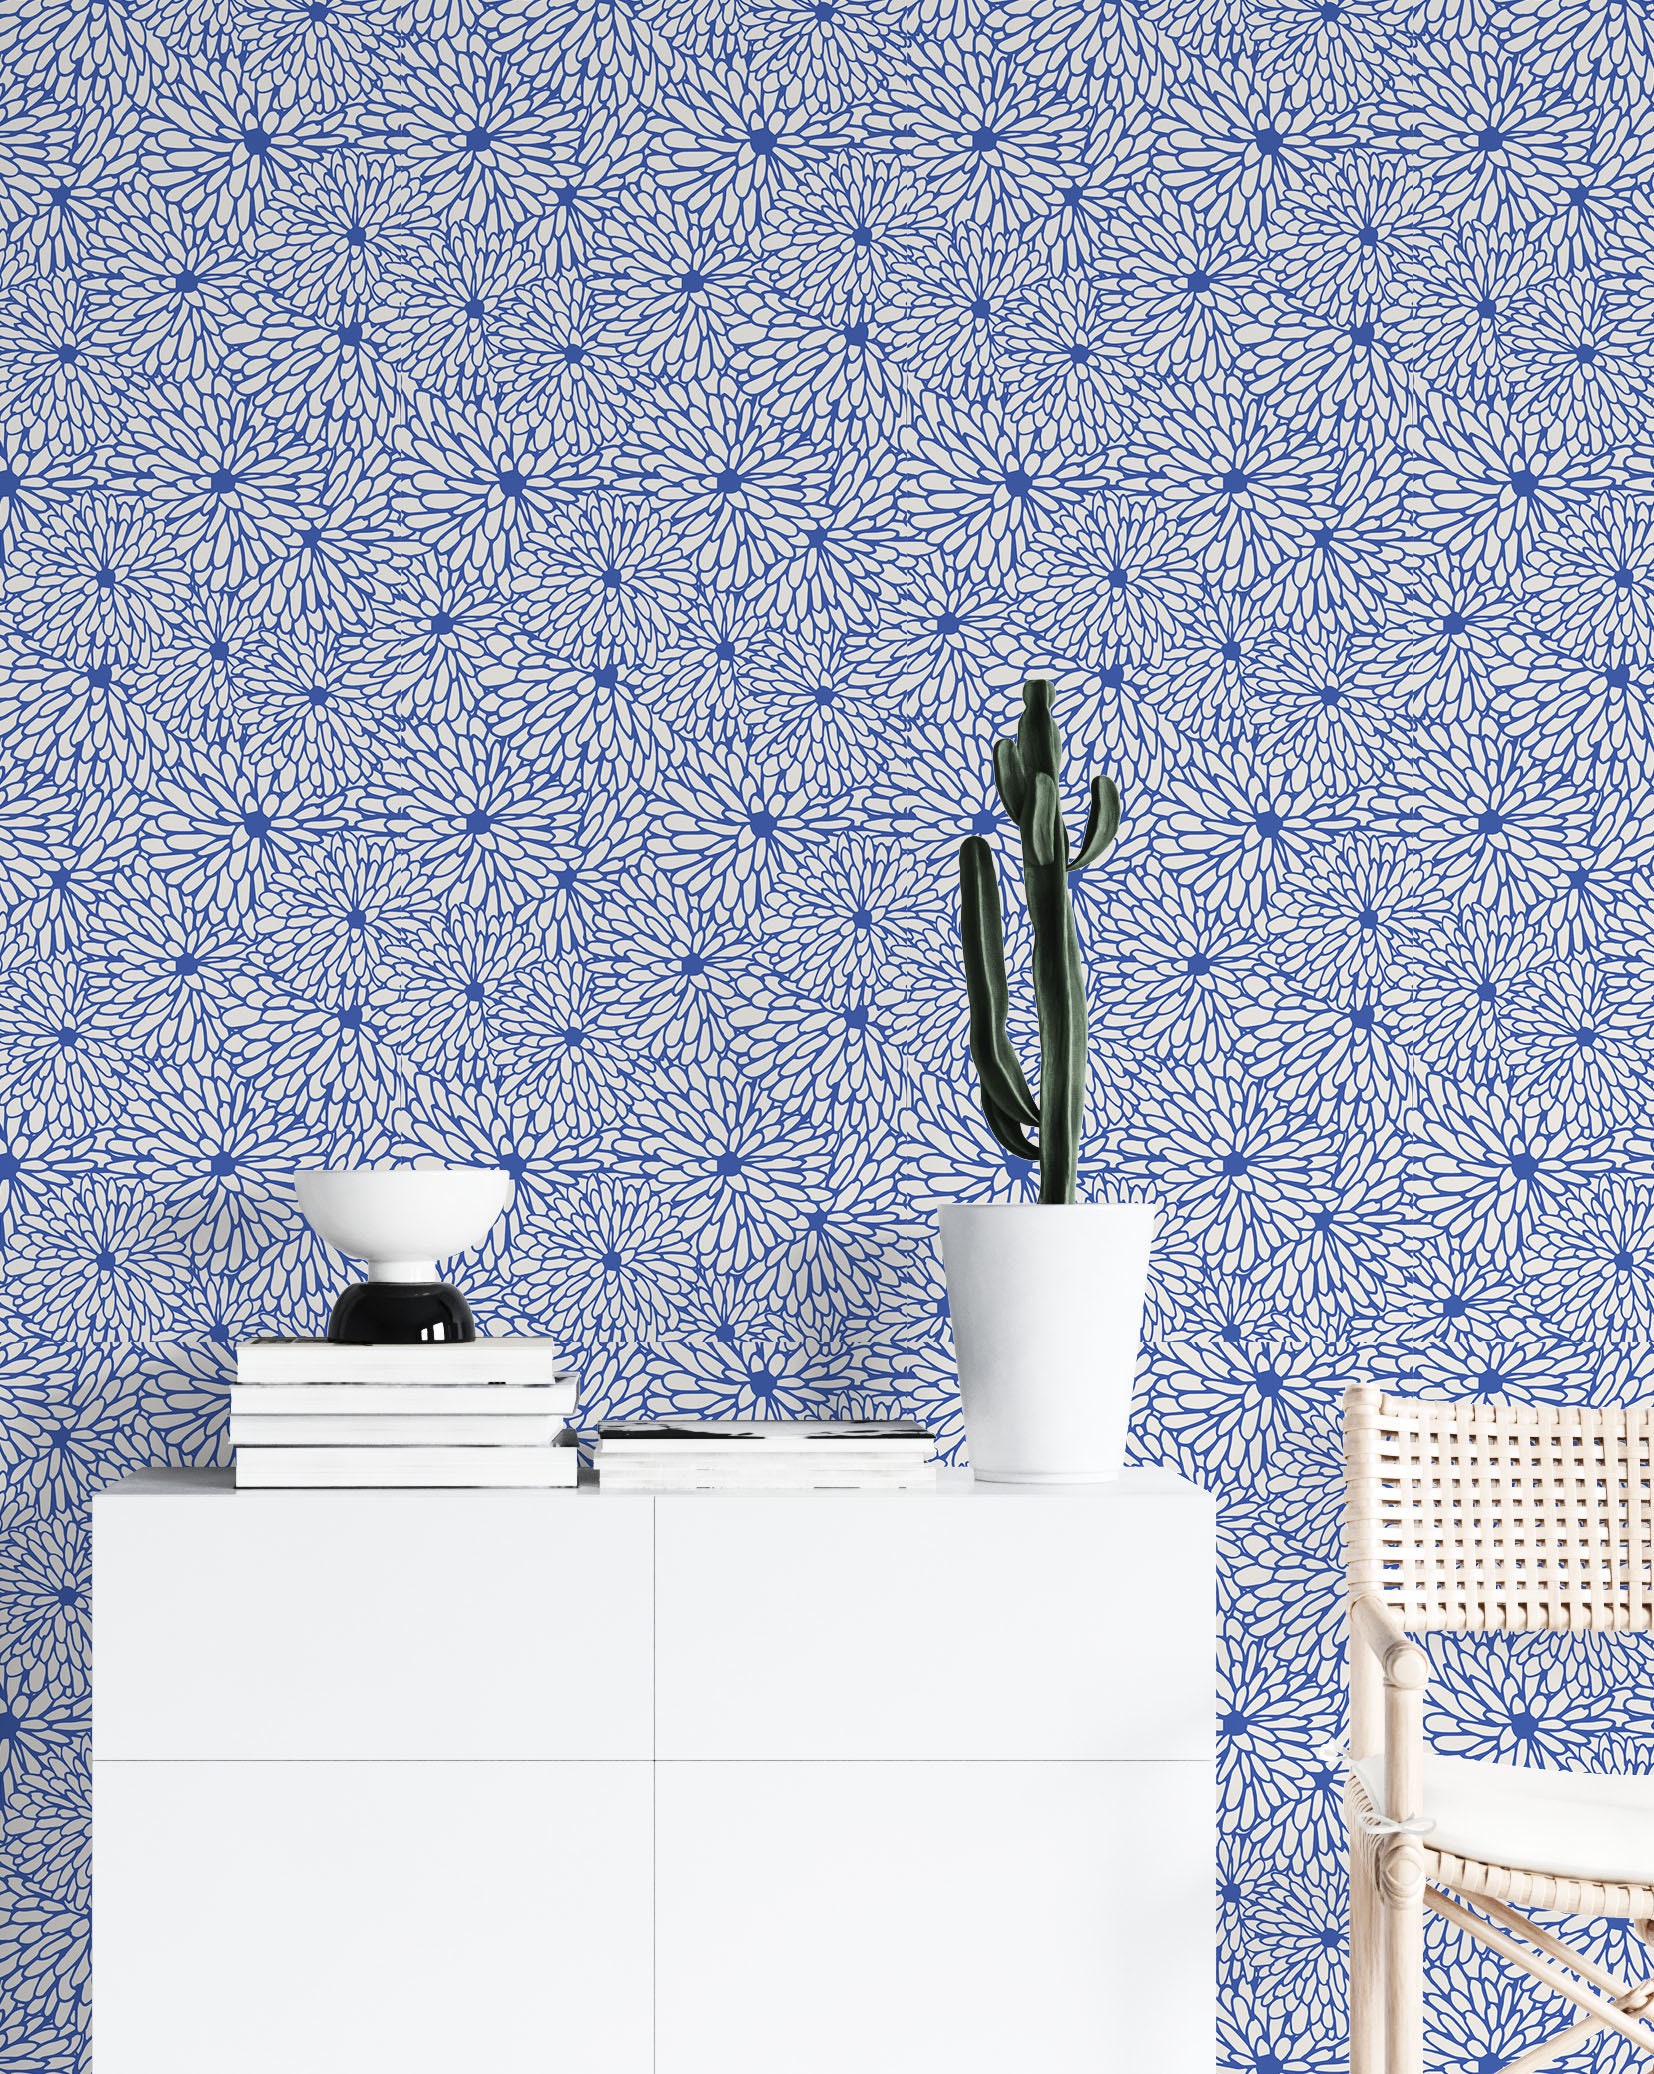 Blue Floral Wallpaper Peel and Stick Cornflower Self Adhesive Wall